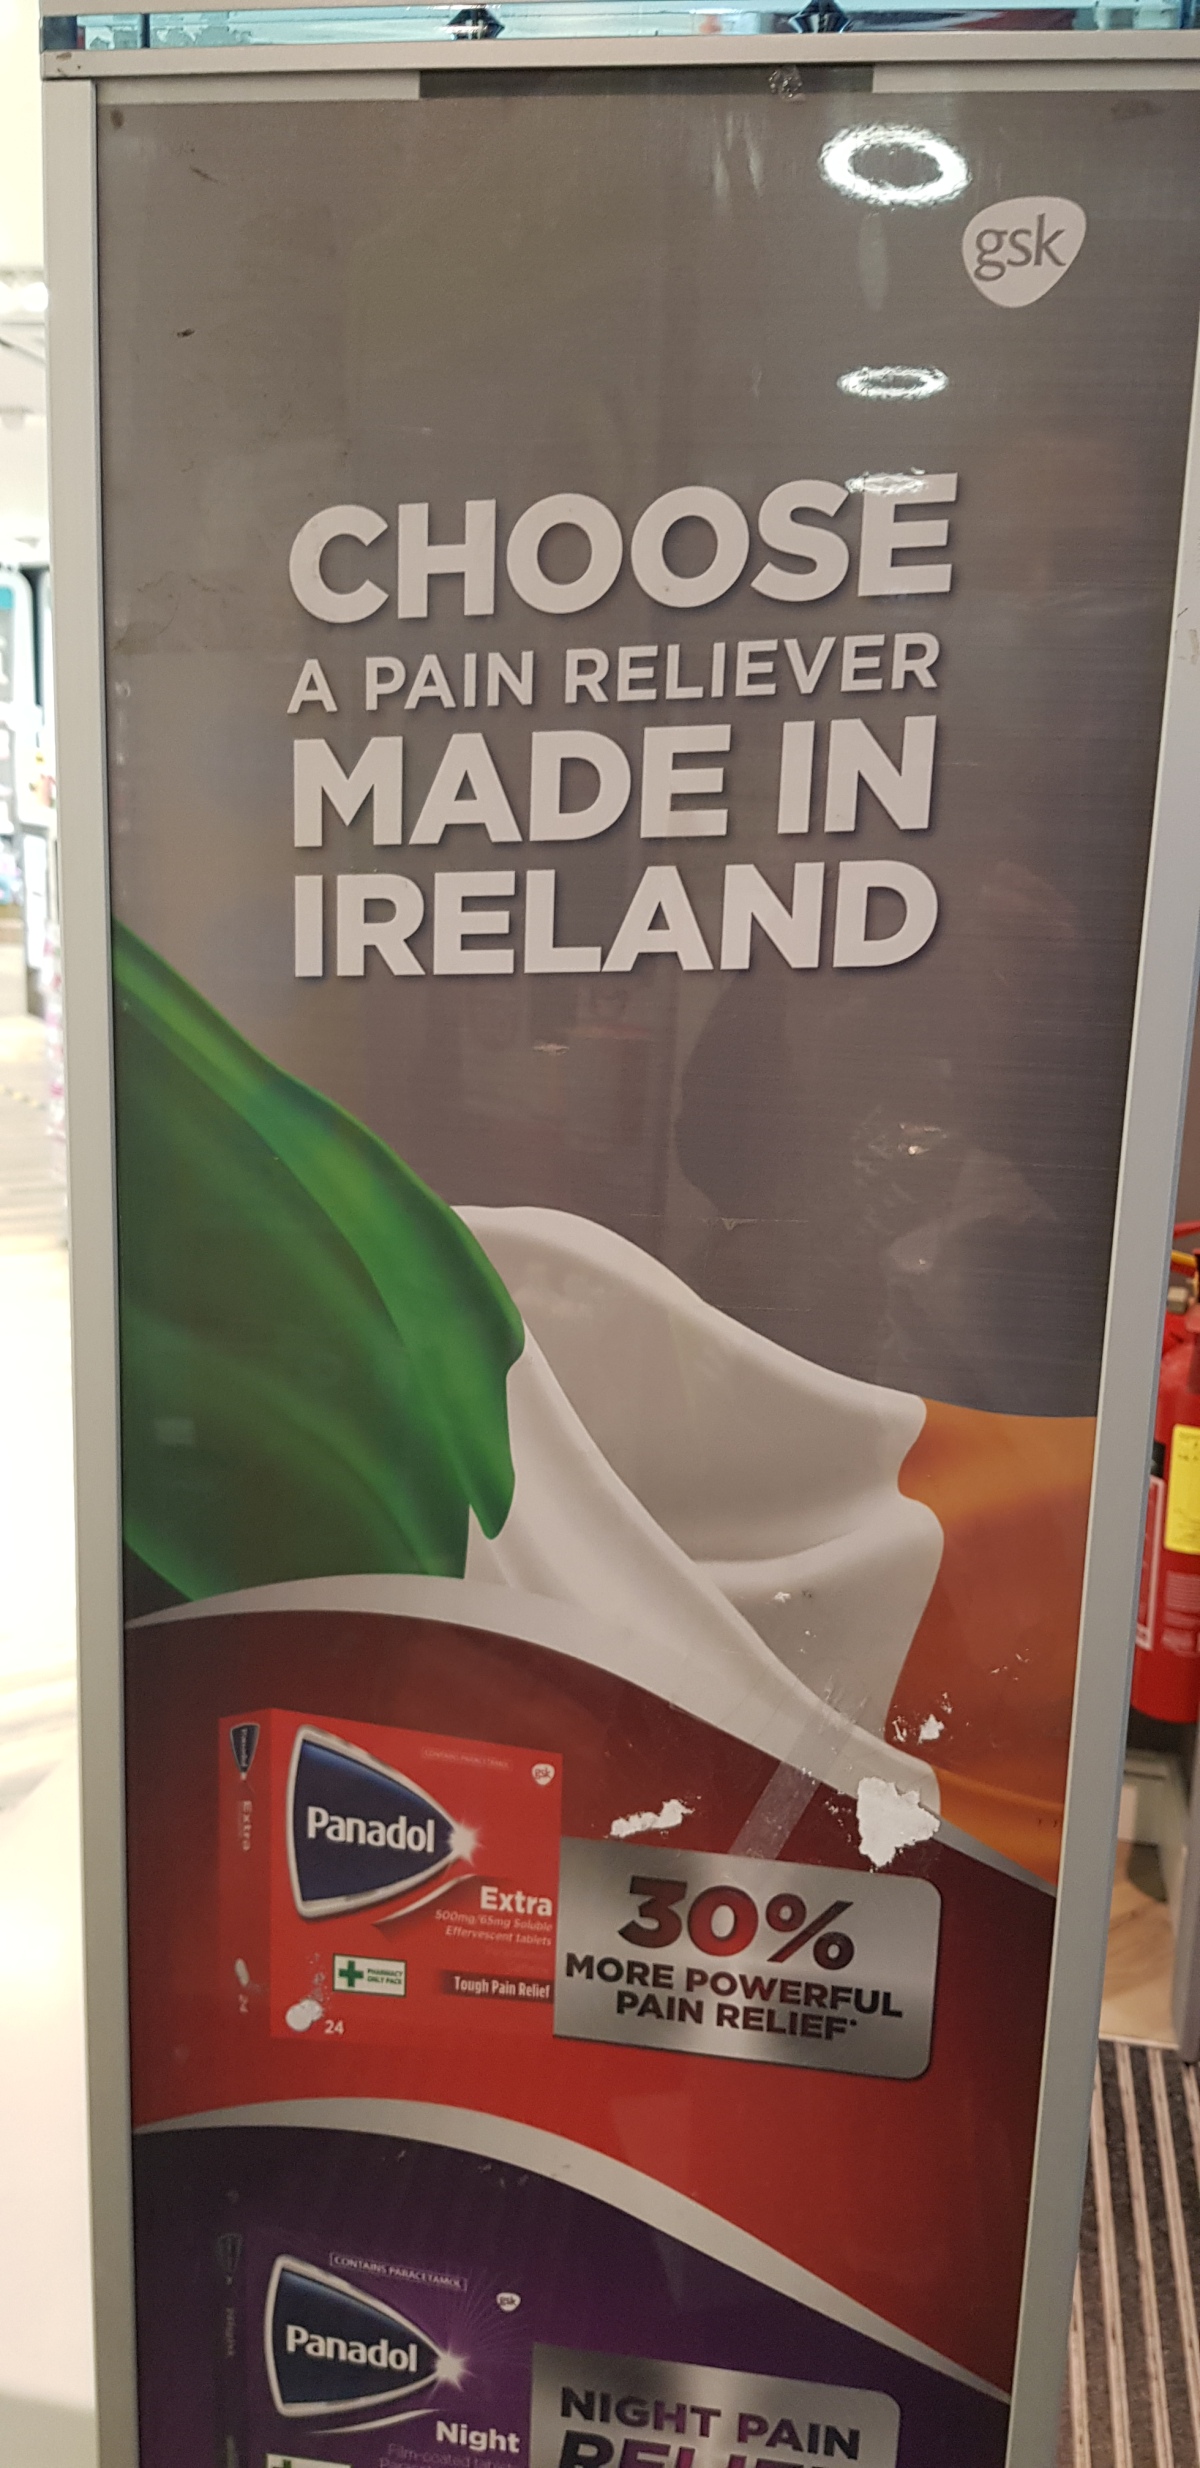 Proud of the Irish products